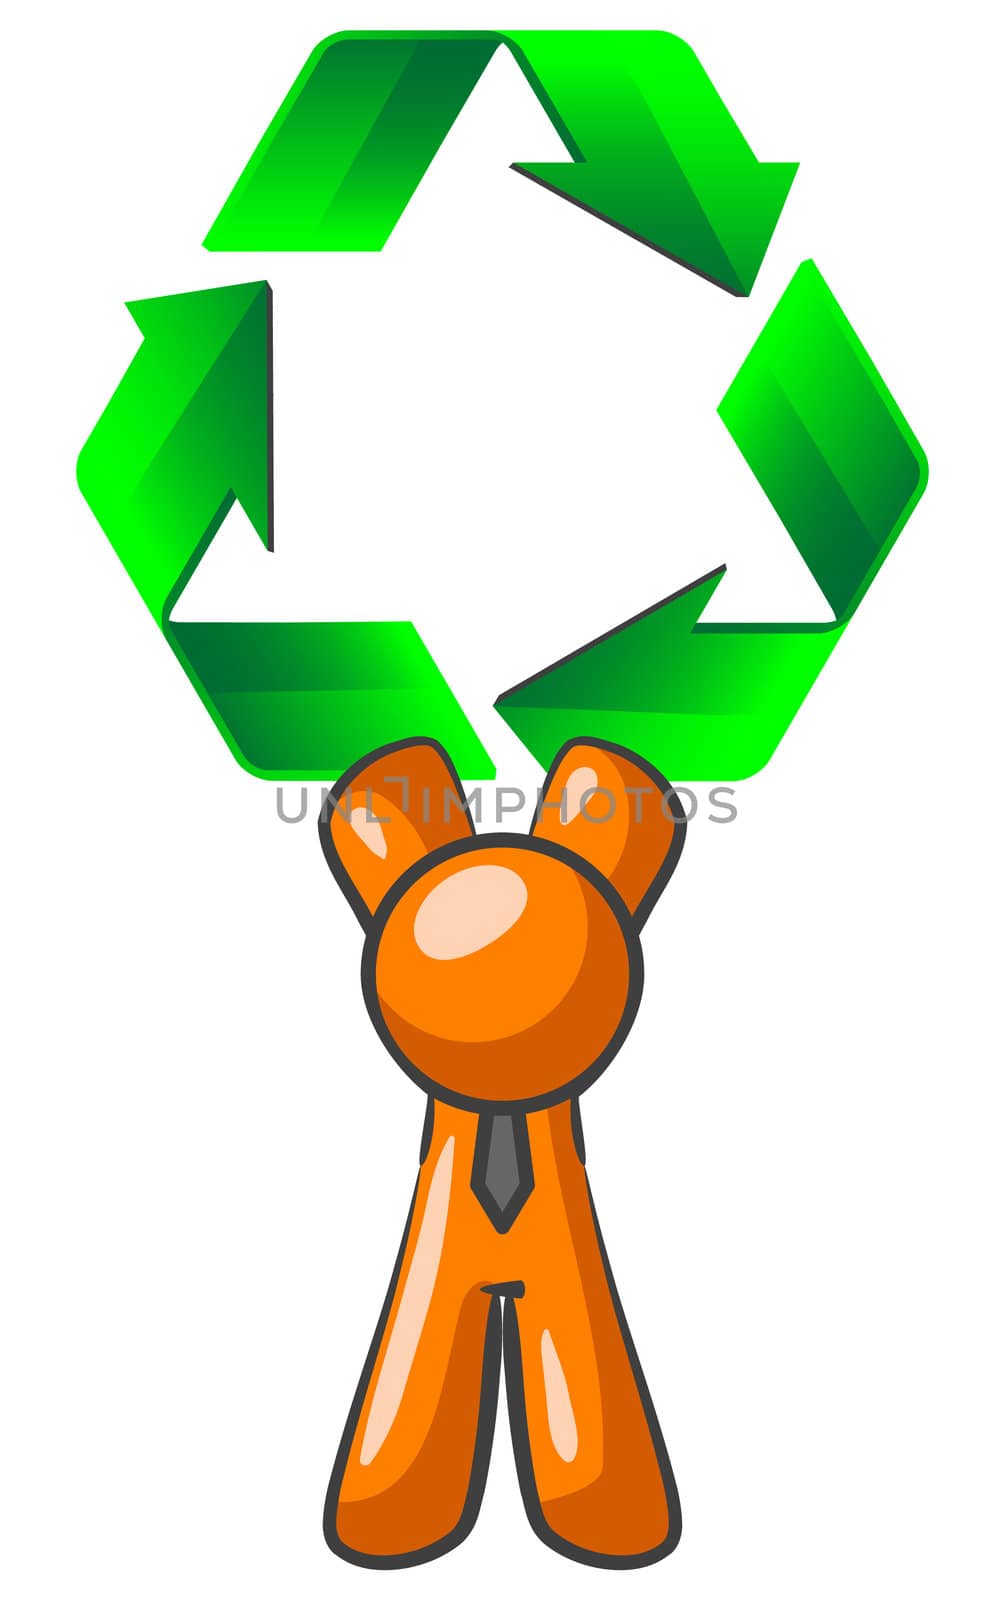 An orange man holding up a large recycling symbol. Good concept for environmental subjects. 